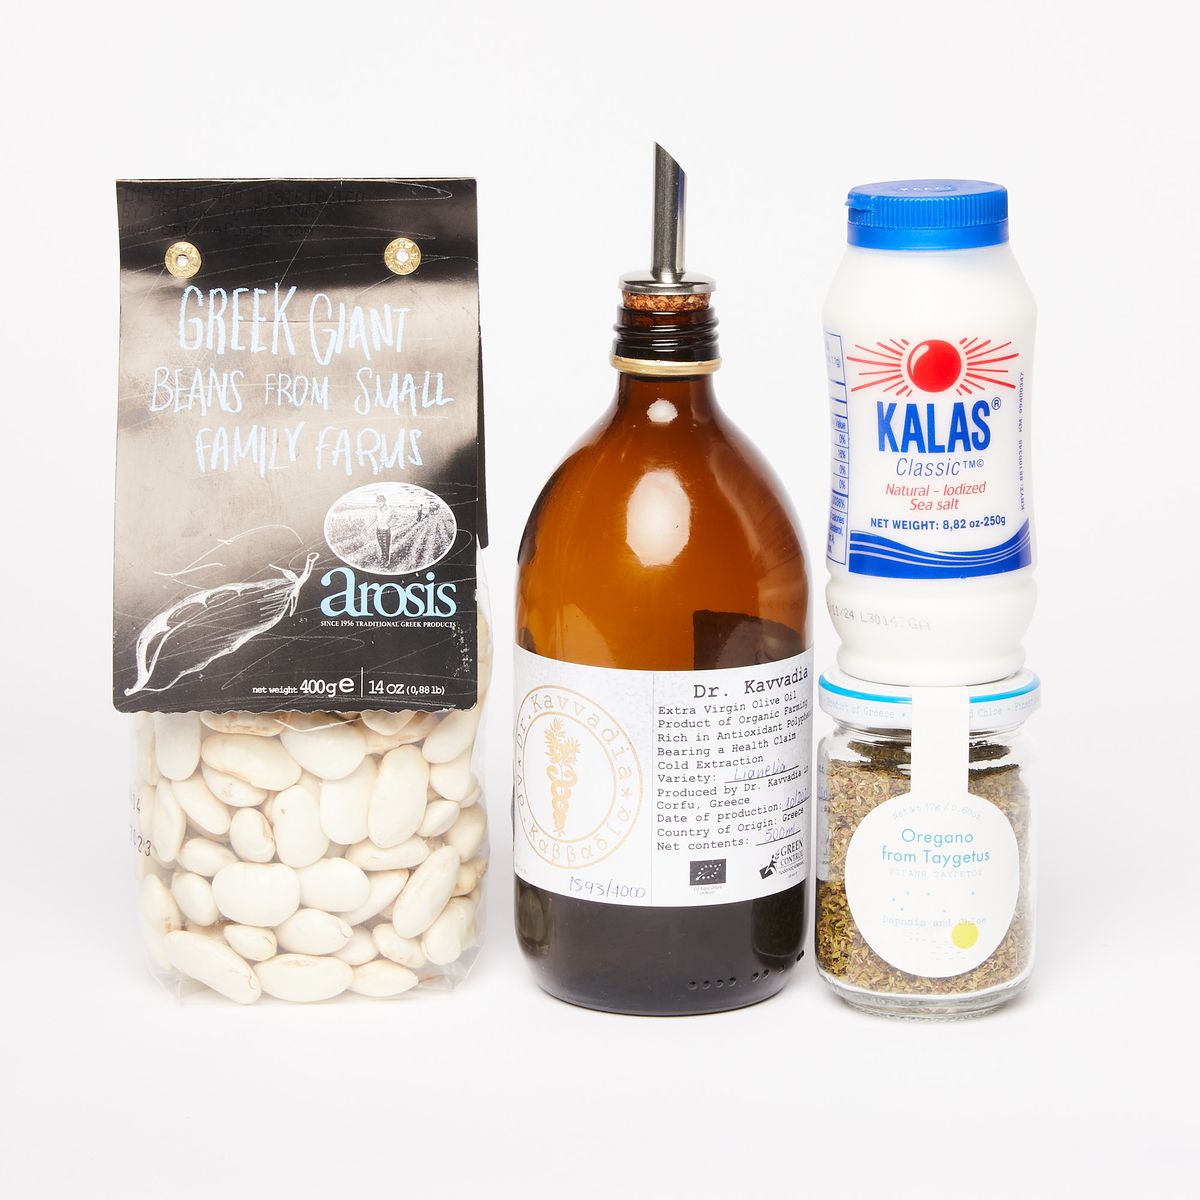 A clear bag of white gigante beans, a brown bottle of olive oil with pourer, a white bottle of salt on top of a clear jar of oregano